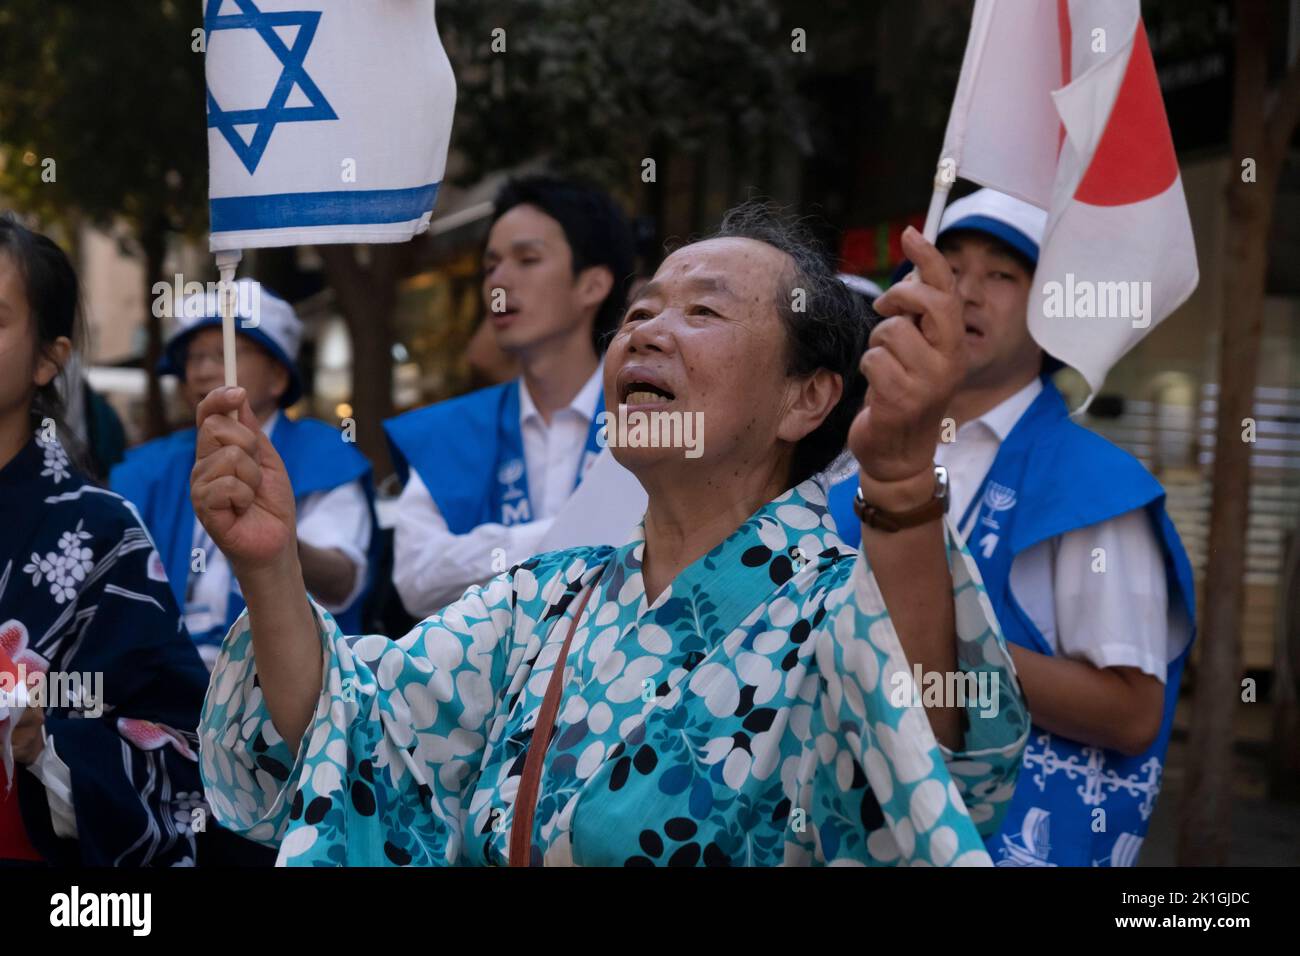 Members of the Japanese Makuya movement wave the national flags of Israel and Japan and sing iconic Jewish songs in Zion Square on September 18, 2022 in downtown Jerusalem, Israel. The Makuya movement is a religious movement which was founded in 1948 in Japan, Its members are passionate supporters of Israel and consider the establishment of the Jewish state and the unification of Jerusalem 19 years later to be the fulfillment of biblical prophecies. Stock Photo